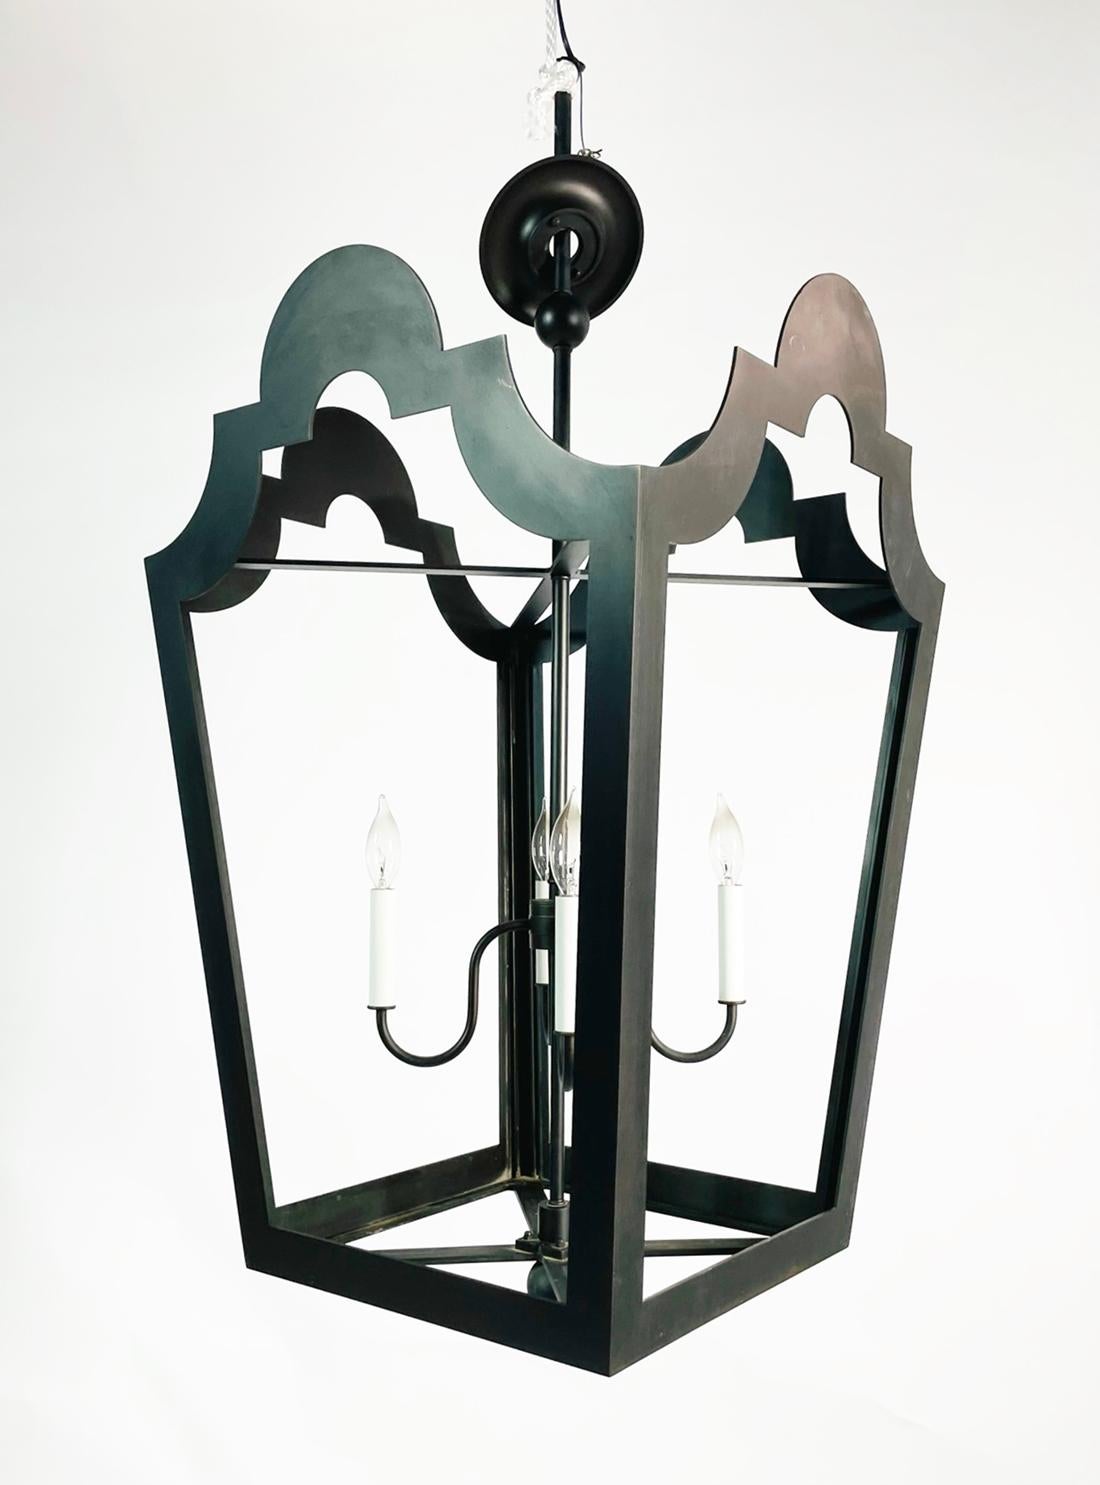 Beautiful chandelier designed by Richard Mishaan and manufactured by The Urban Electric and part of the Venetian collection which is no longer sold.

The chandelier is made in solid steel with a black finish.

This chandelier is hand-made by